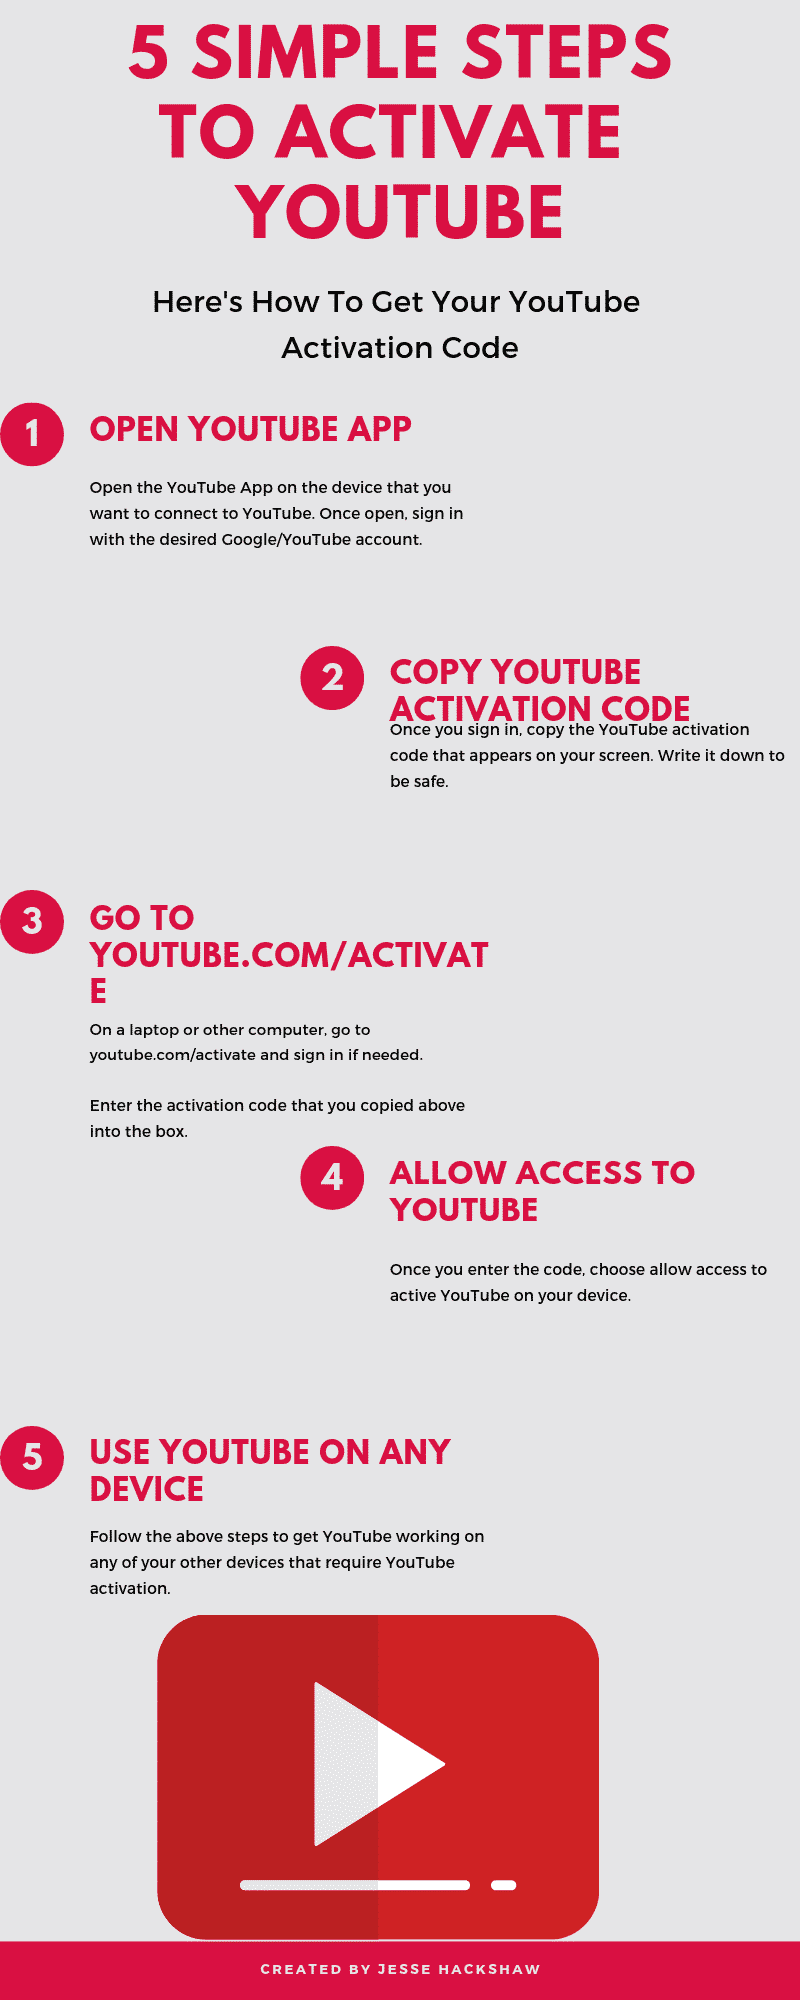 Easily Activate Youtube On Any Device Using Youtube Com Activate